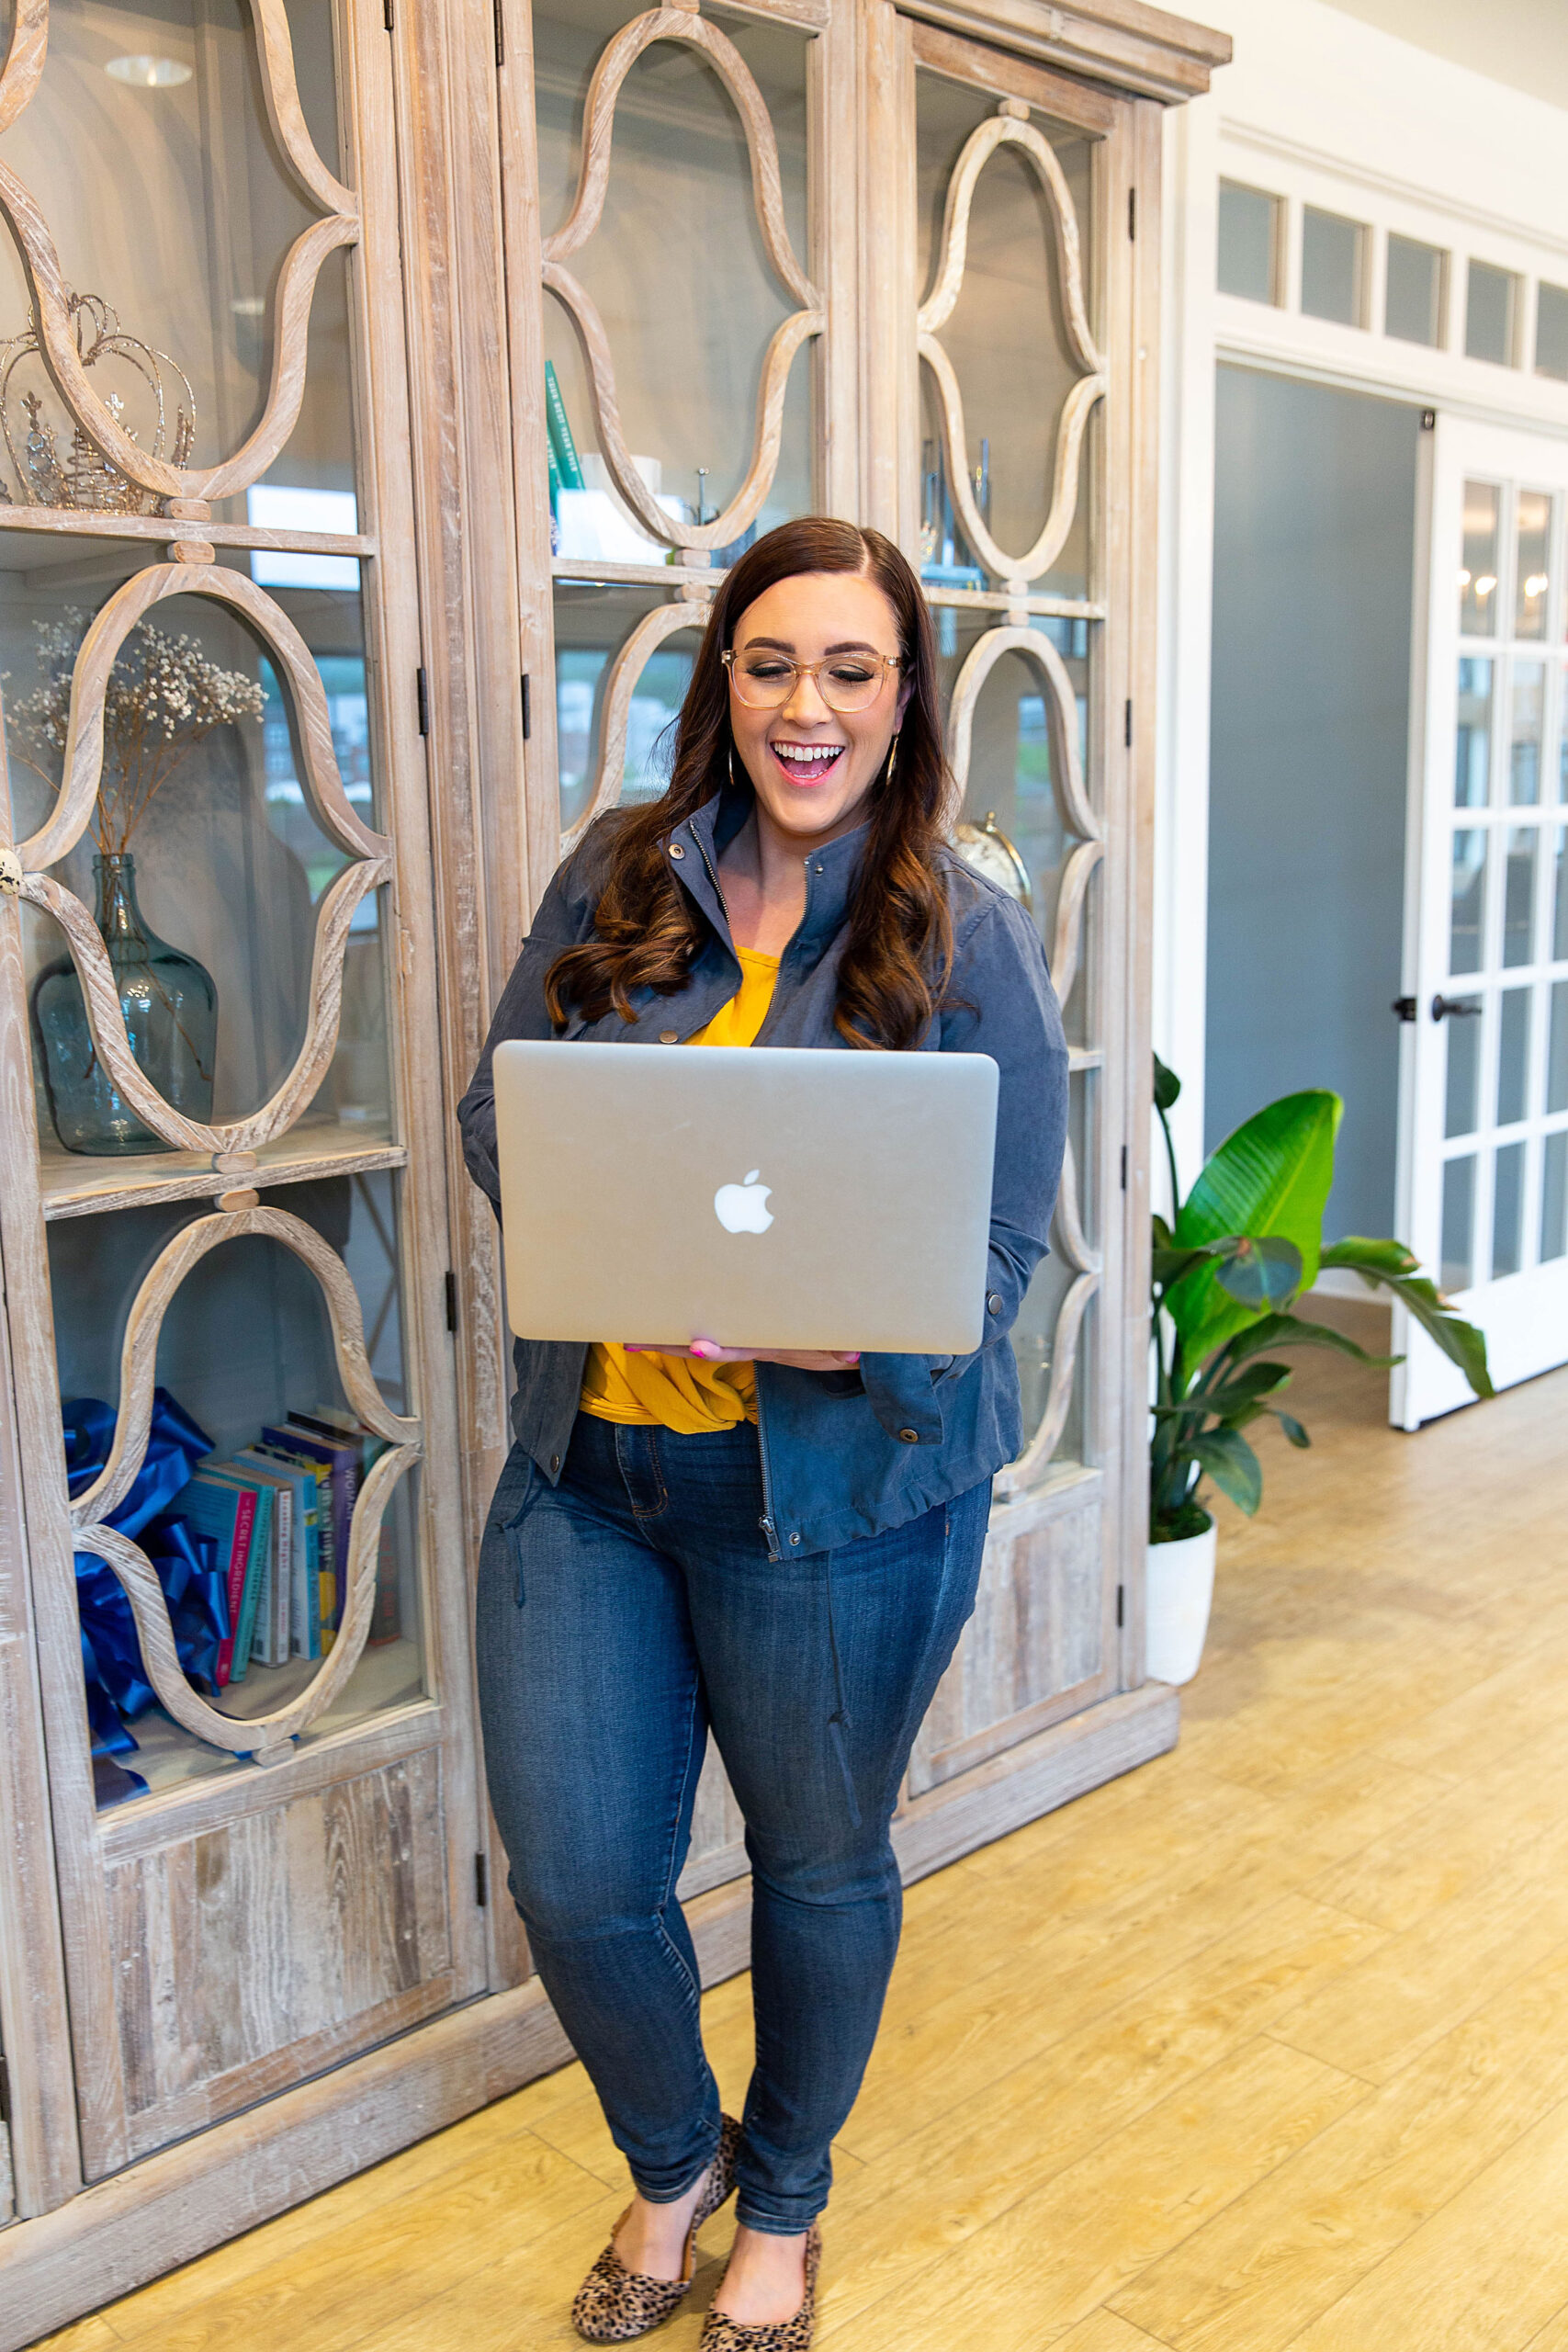 Lady holding a laptop and smiling | How to create a solid email strategy and stop losing leads | The School of Marketing Podcast for Digital Entrepreneurs